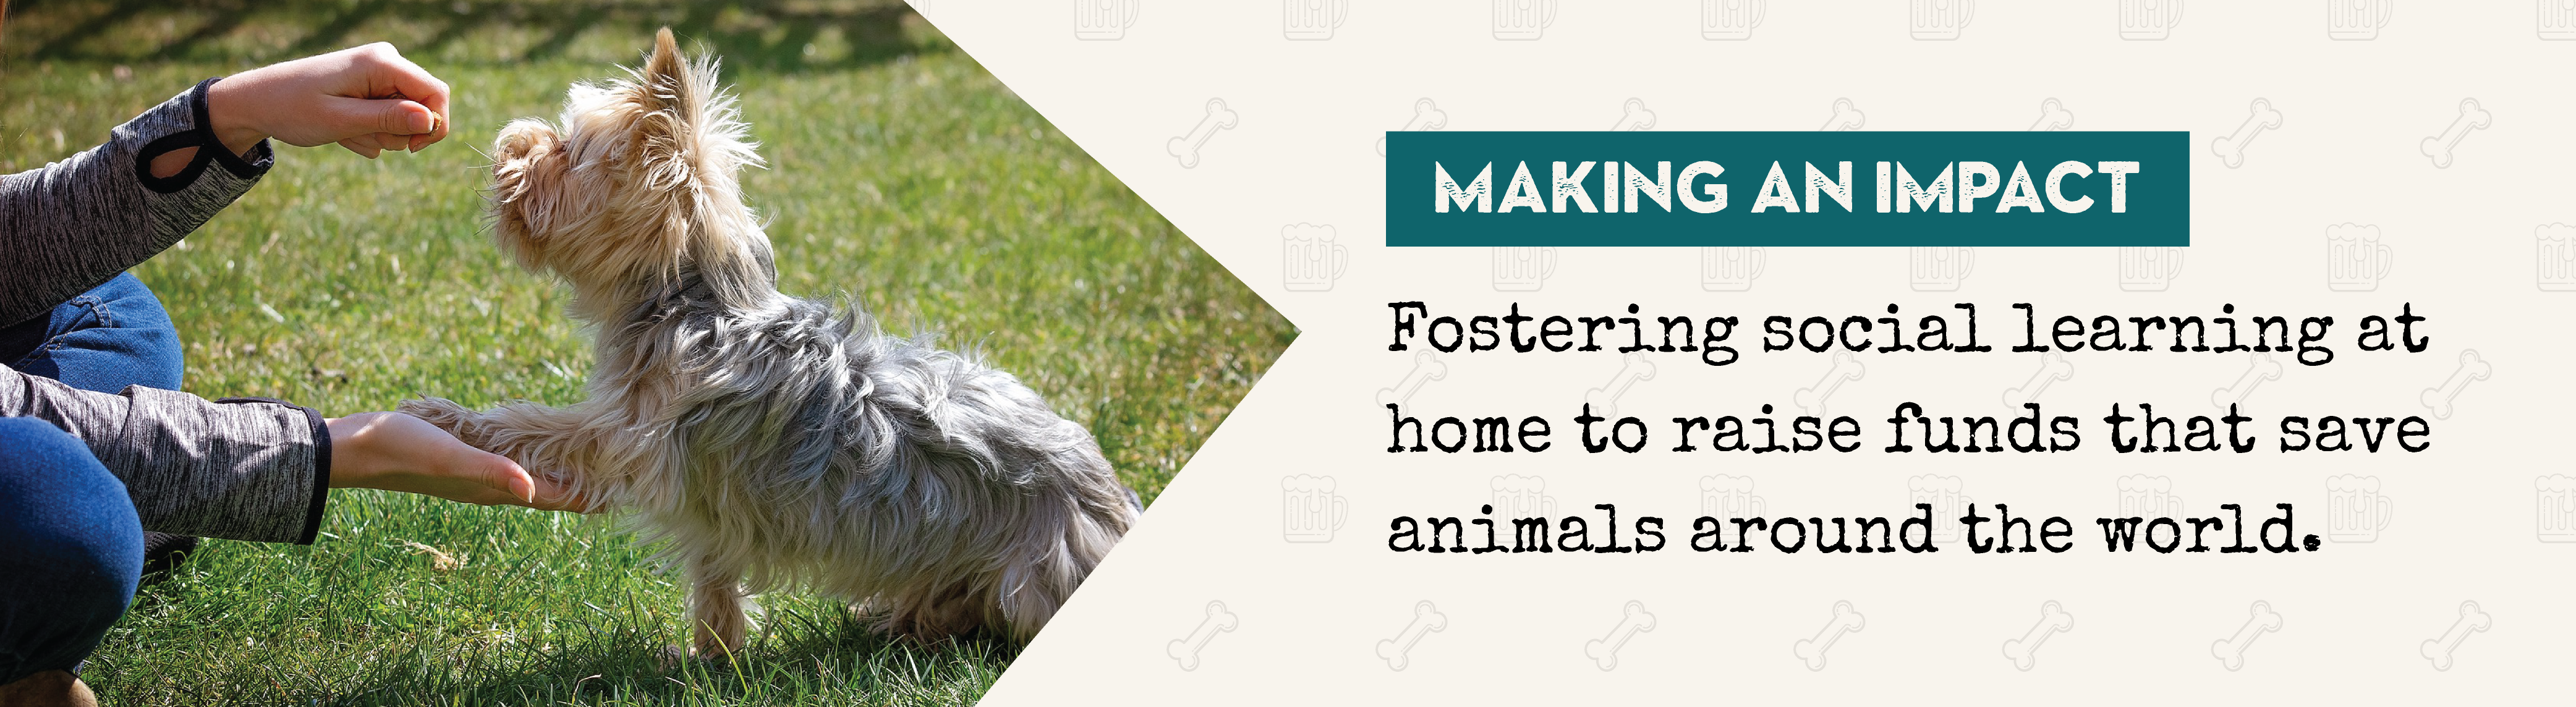 Fostering social learning at home to raise funds that save animals around the world.